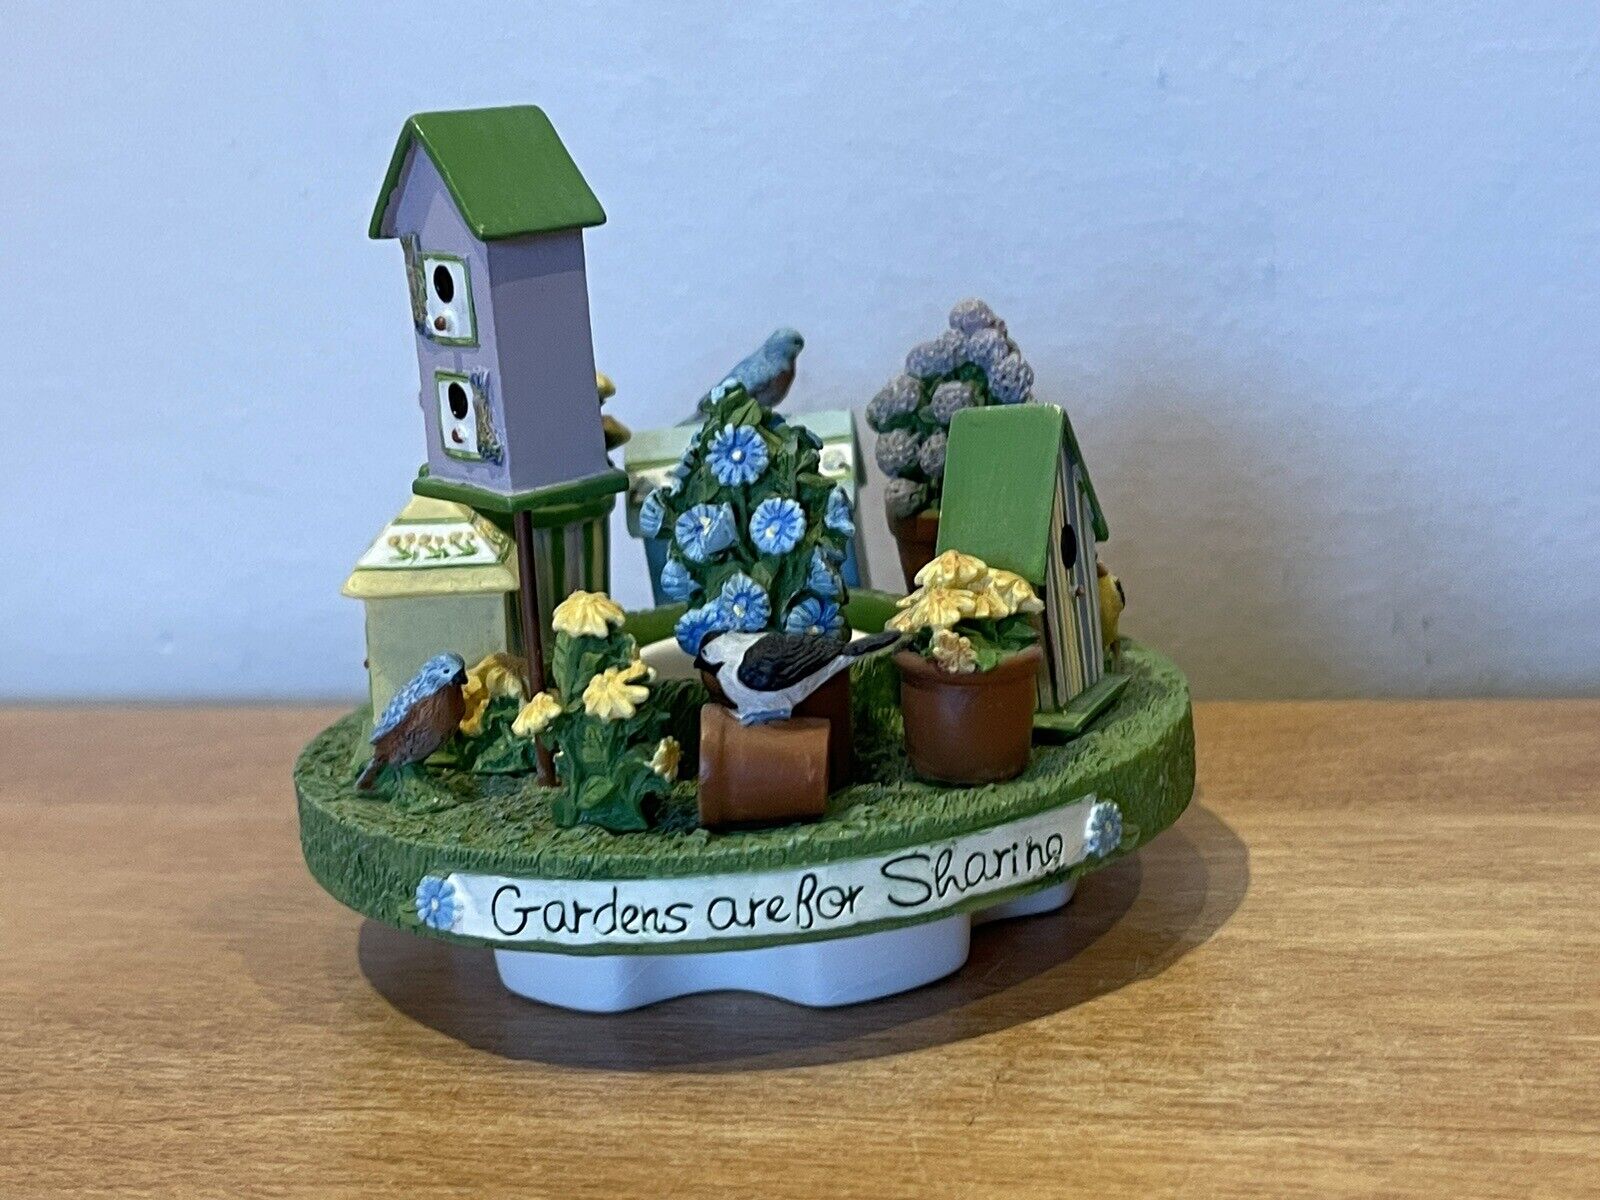 Yankee Candle Capper “Gardens Are For Sharing” Birdhouses, Kathy Hatch EUC